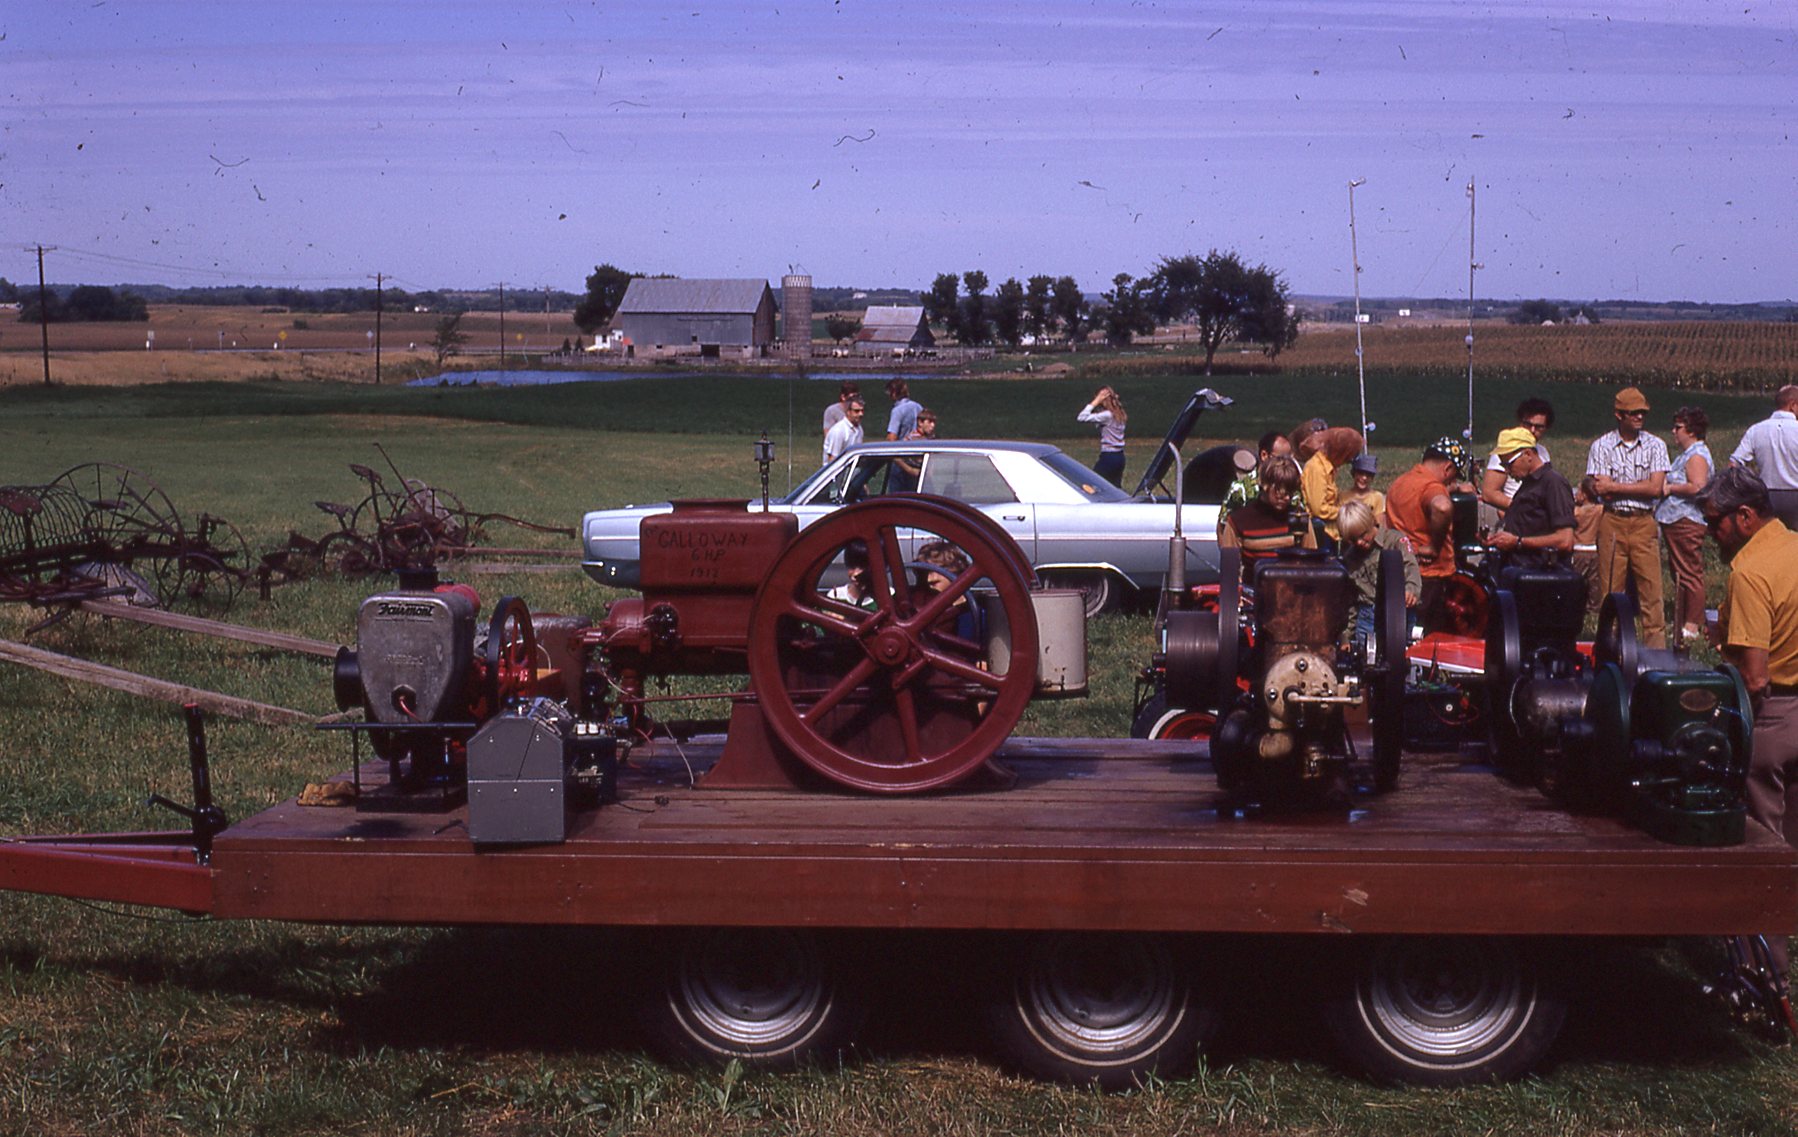 Rogers Threshing Show Small Engines with Dehn Farm in distance.